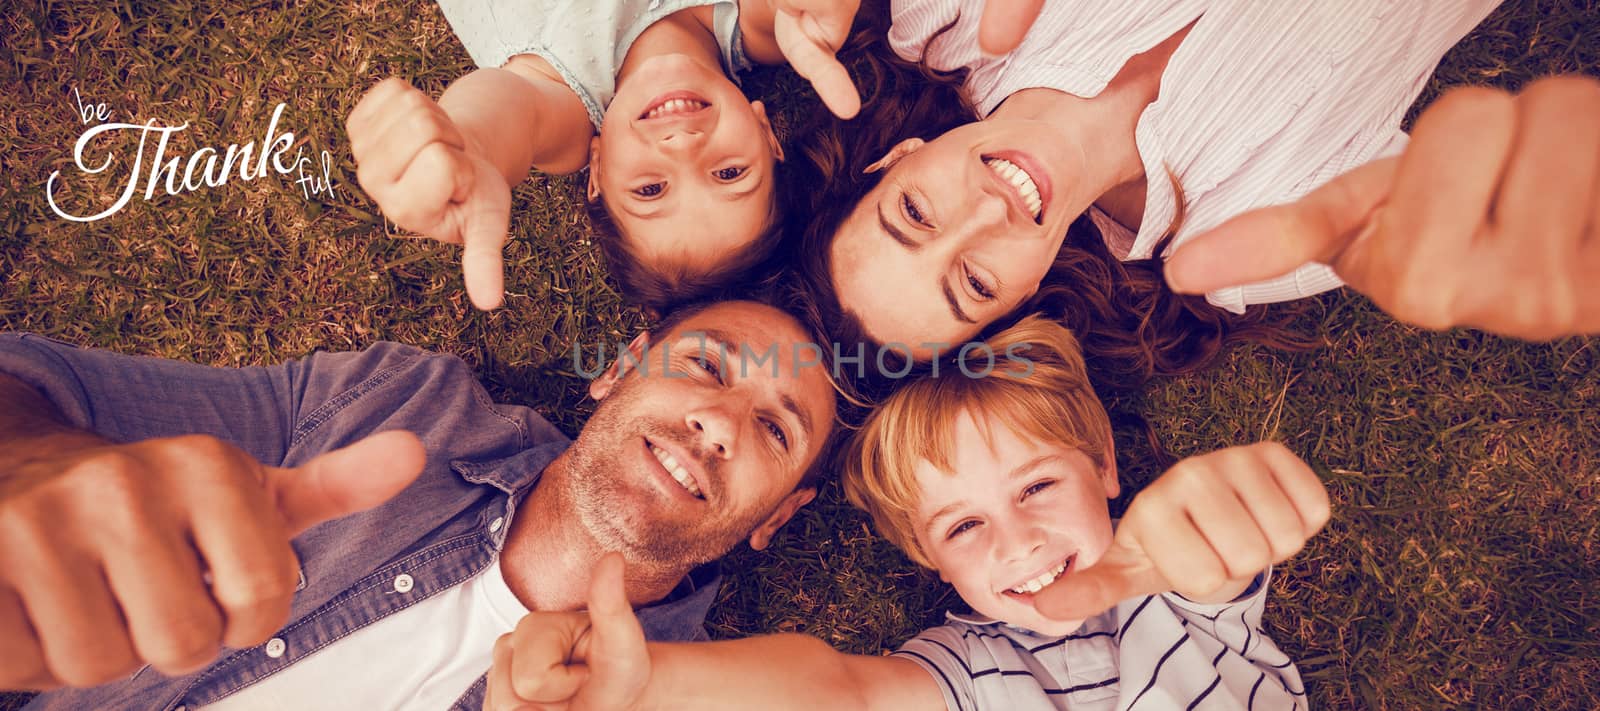 Digital image of happy thanksgiving day text greeting against happy family in park together gesturing thumbs up